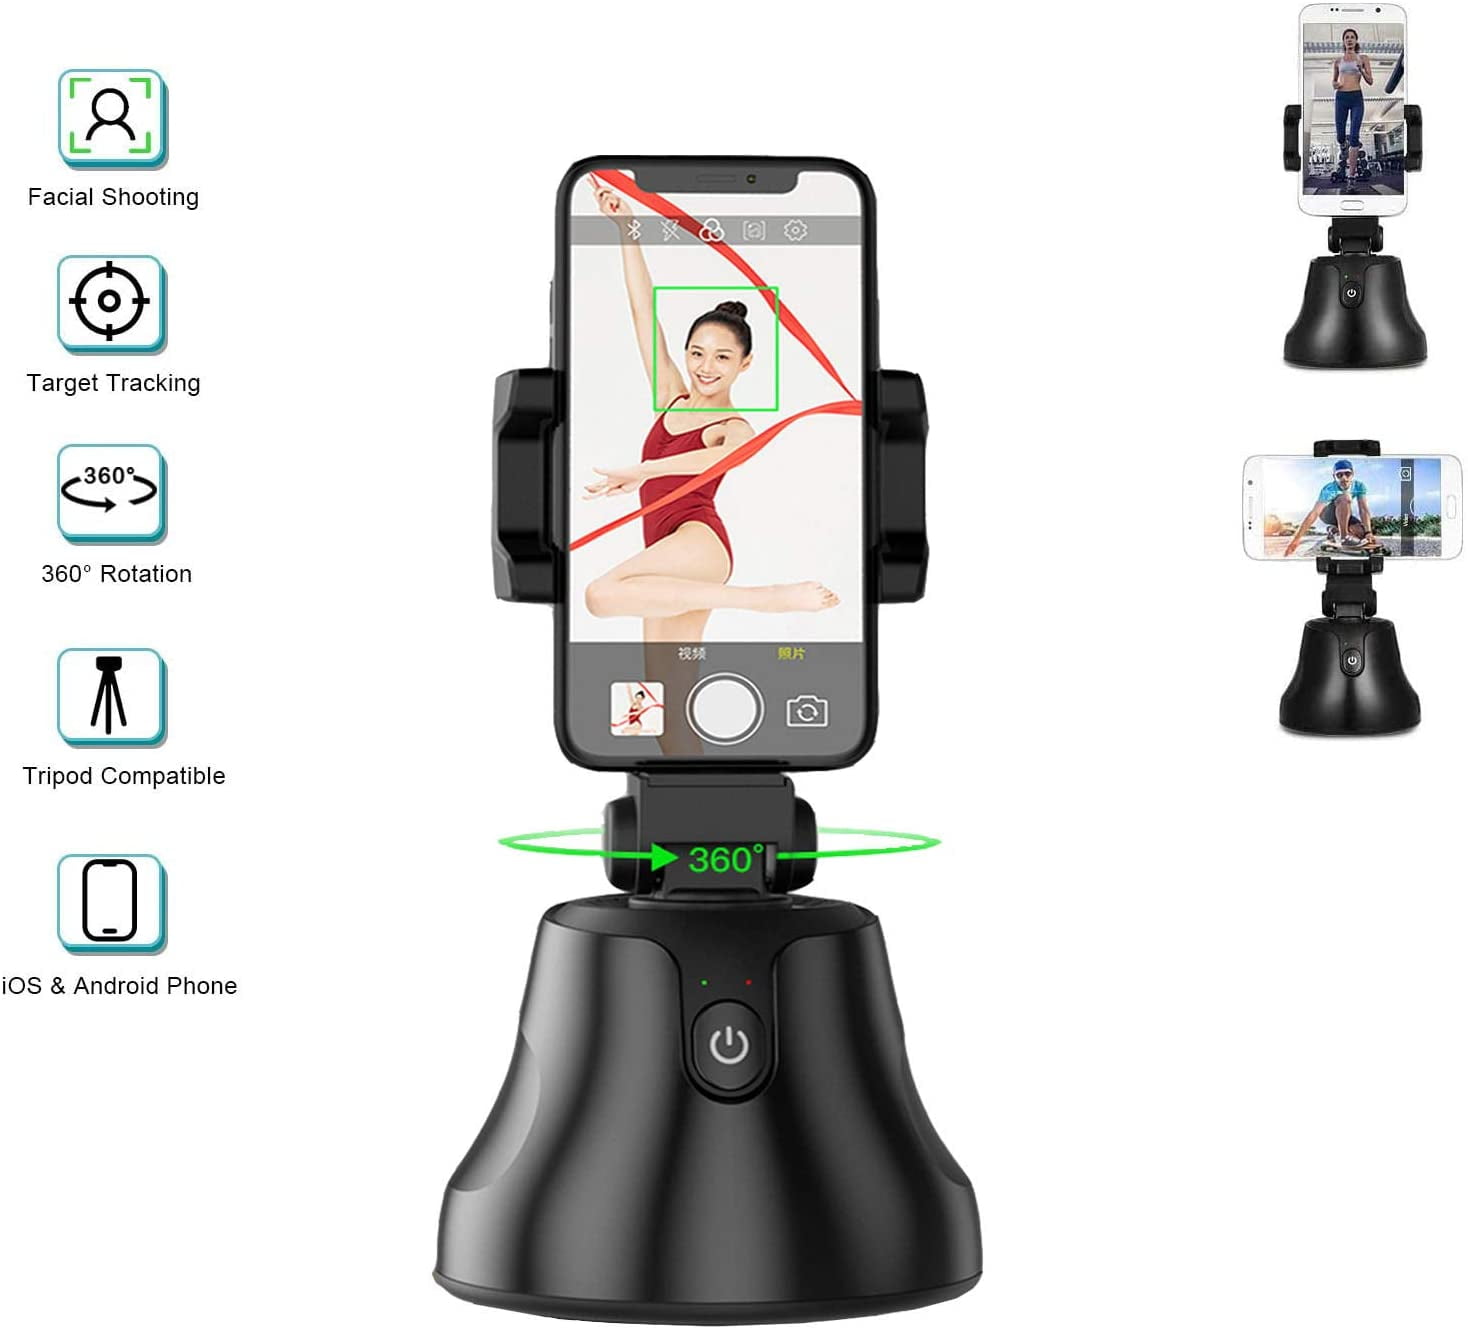 Automatic Face Tracking Object Tracking Smart Face Tracking Mobile Phone Holder Second-Generation 360-Degree Smart Ai Face Recognition and Camera Gimbal Stabilizer